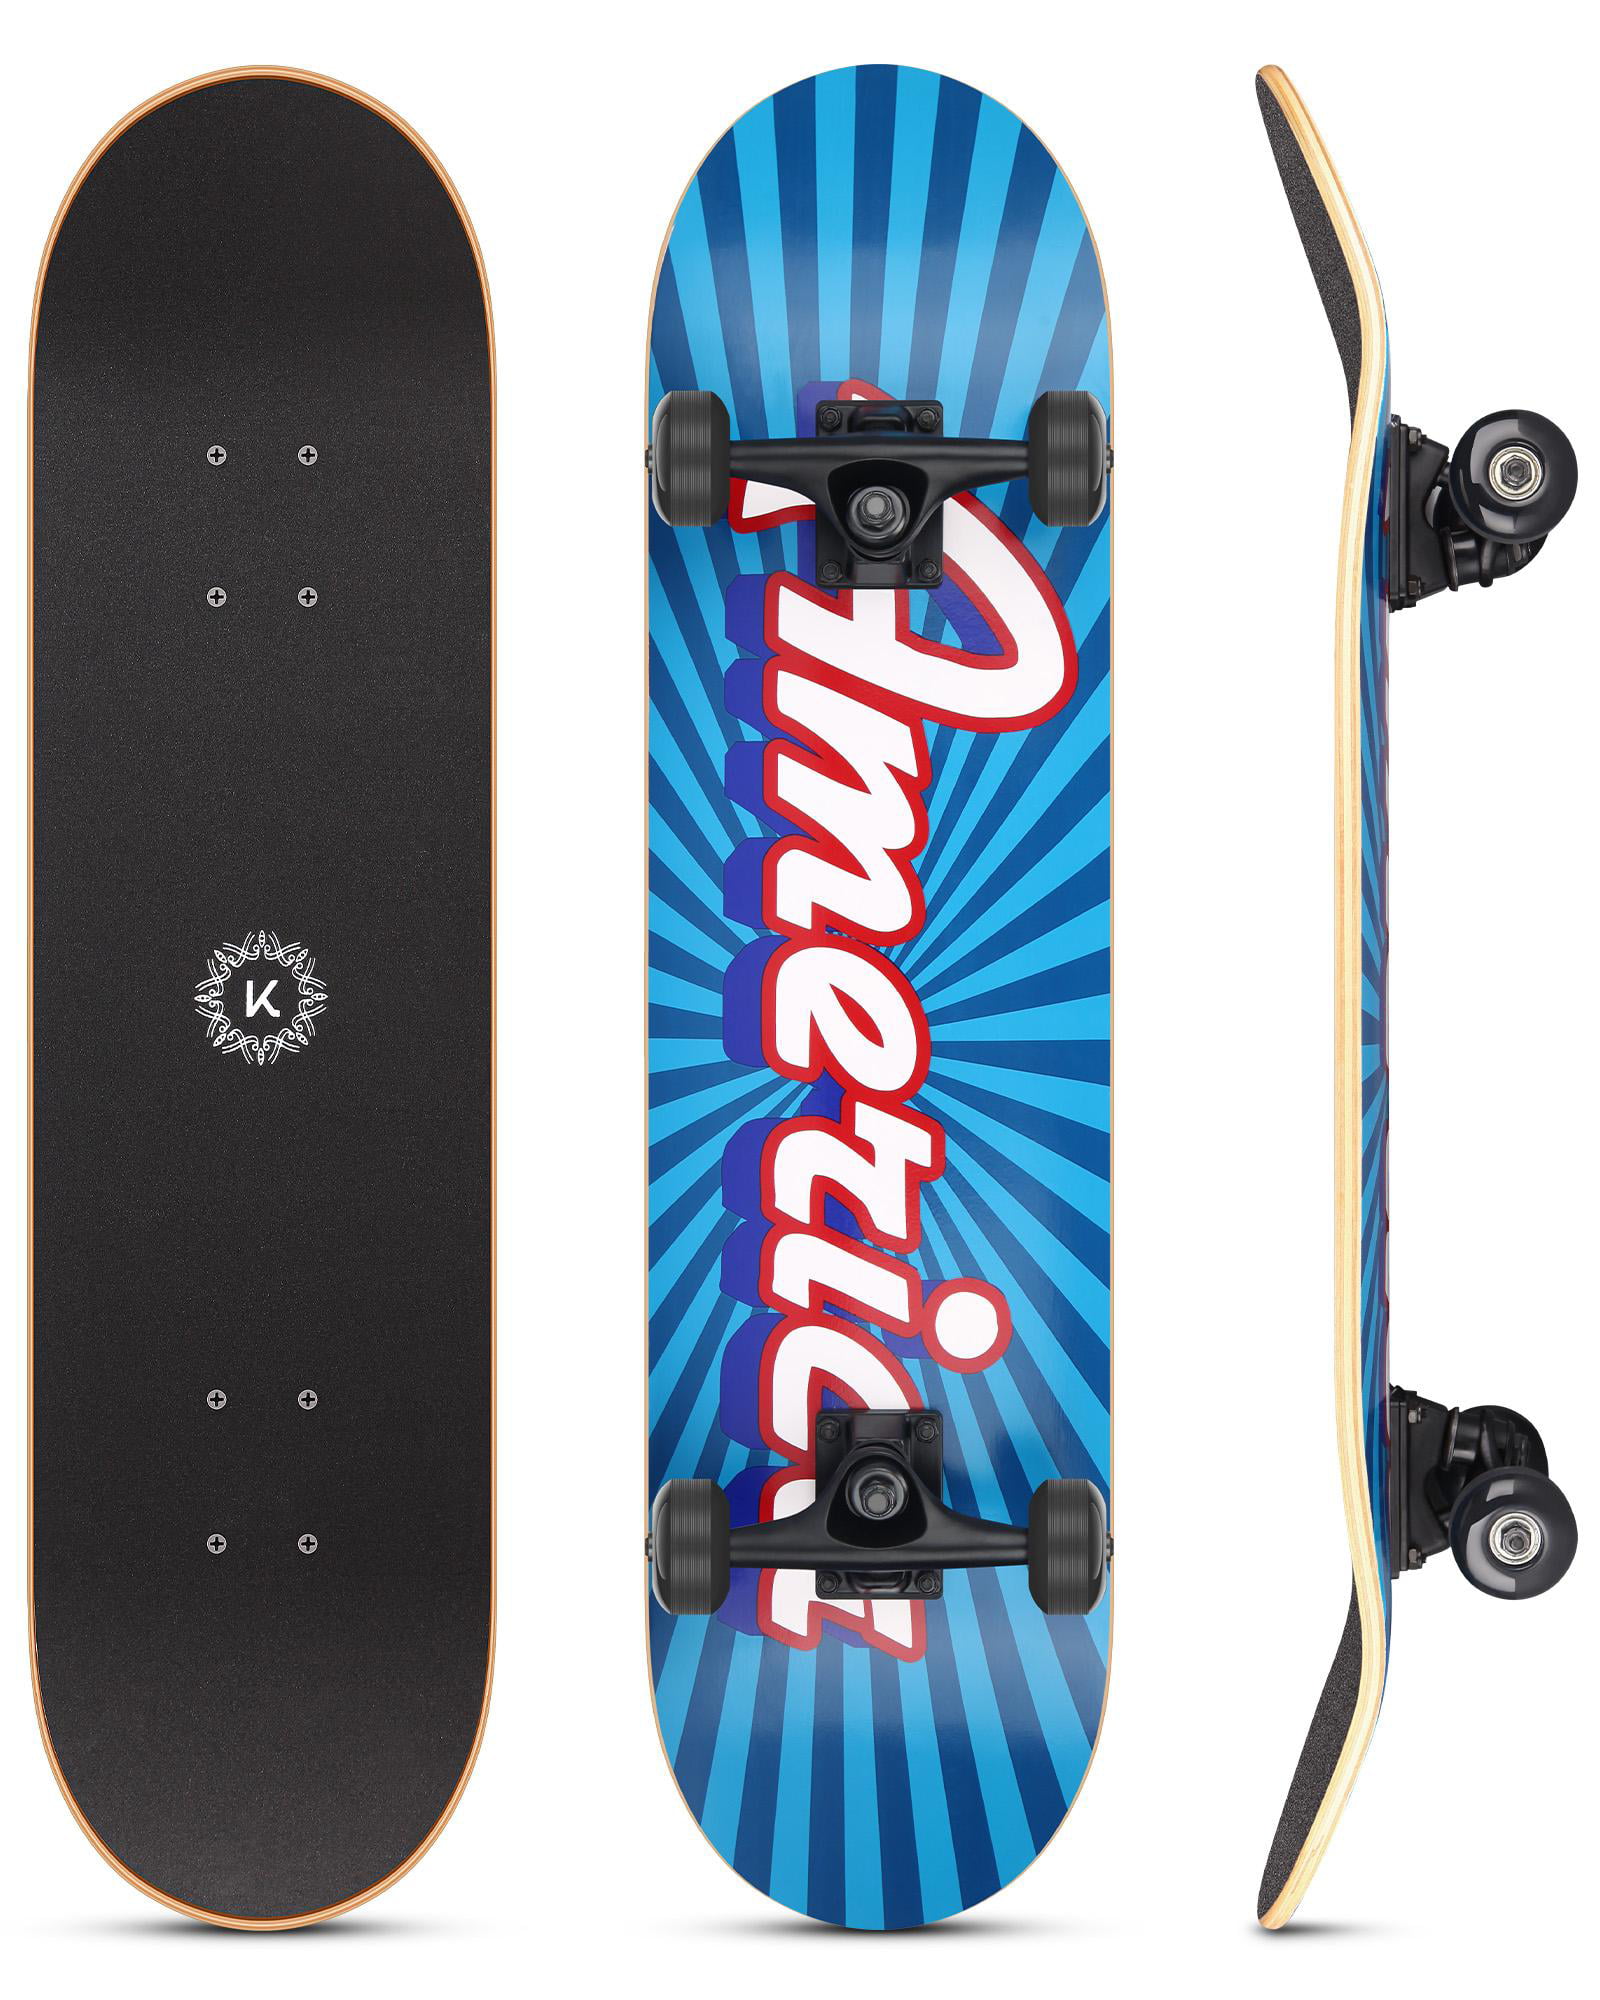 Freestyle Skateboards for Beginners Carving and Cruising with All-in-one T-Tool 31x8 Pro Complete Skateboard with 8 Layer Maple Double Kick Deck and ABEC-9 Bearing for Trick 